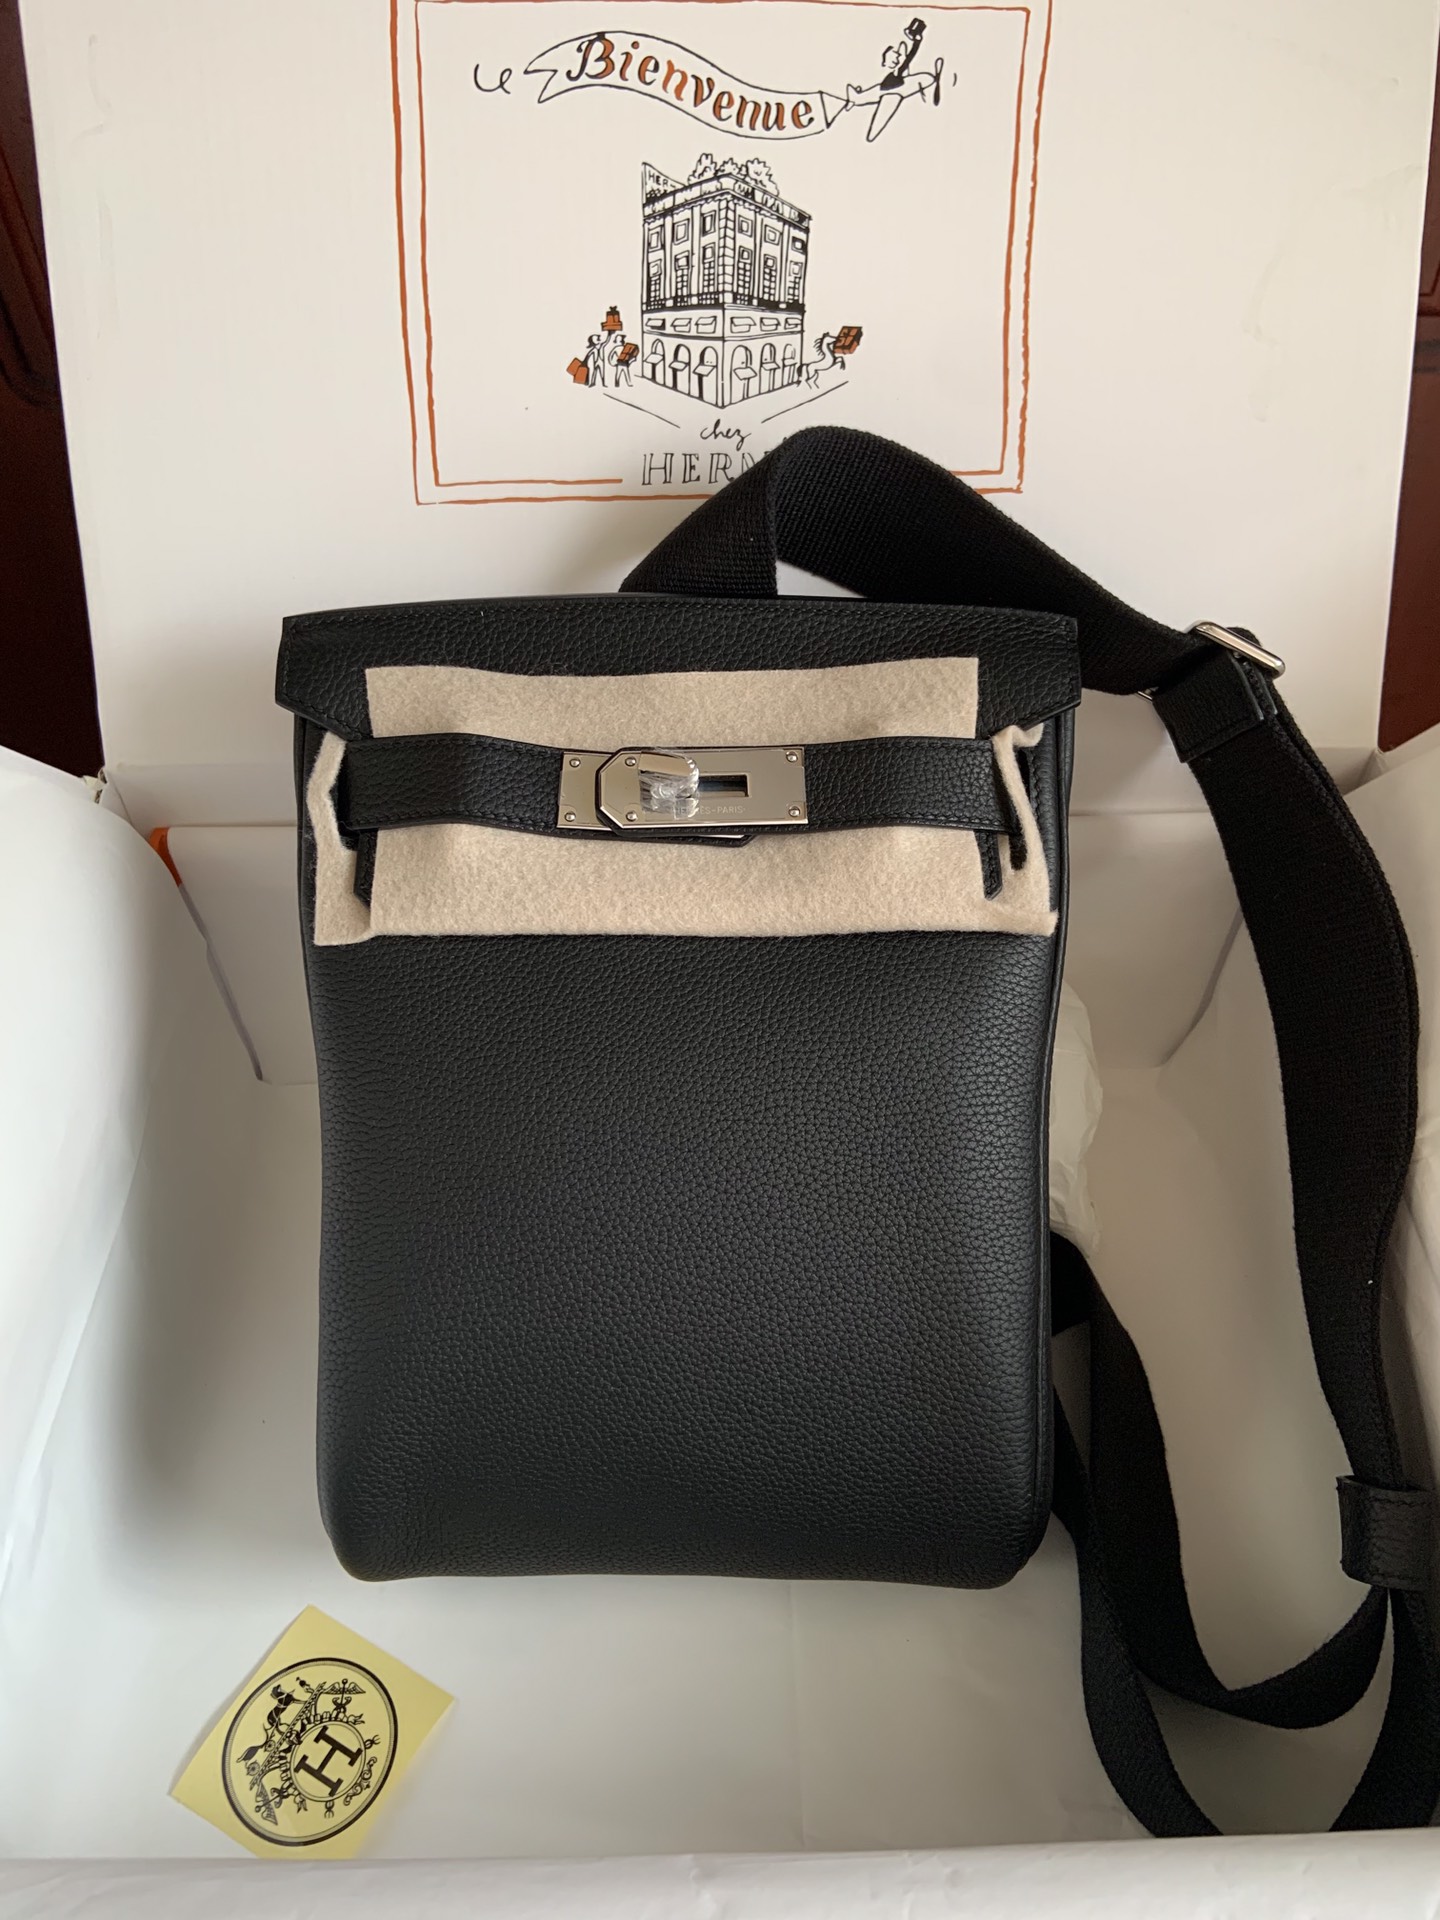 Real 1:1 full handmade Hermes HAC a dos PM Kelly Backpack